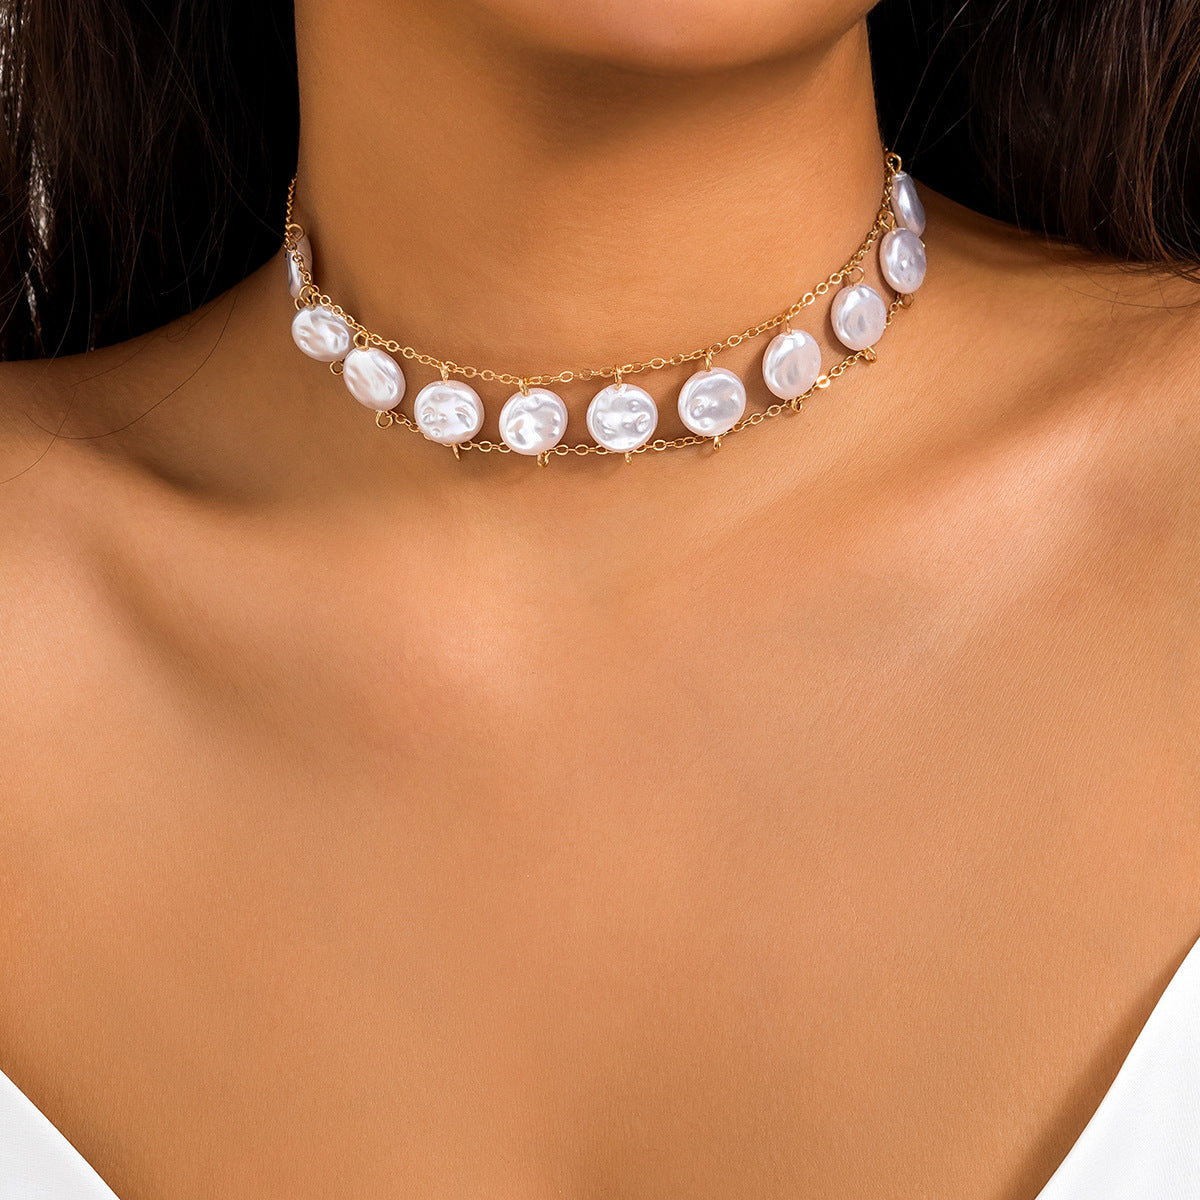 Flat Round Pearl Necklace with Choker Chain - Vienna Verve Collection